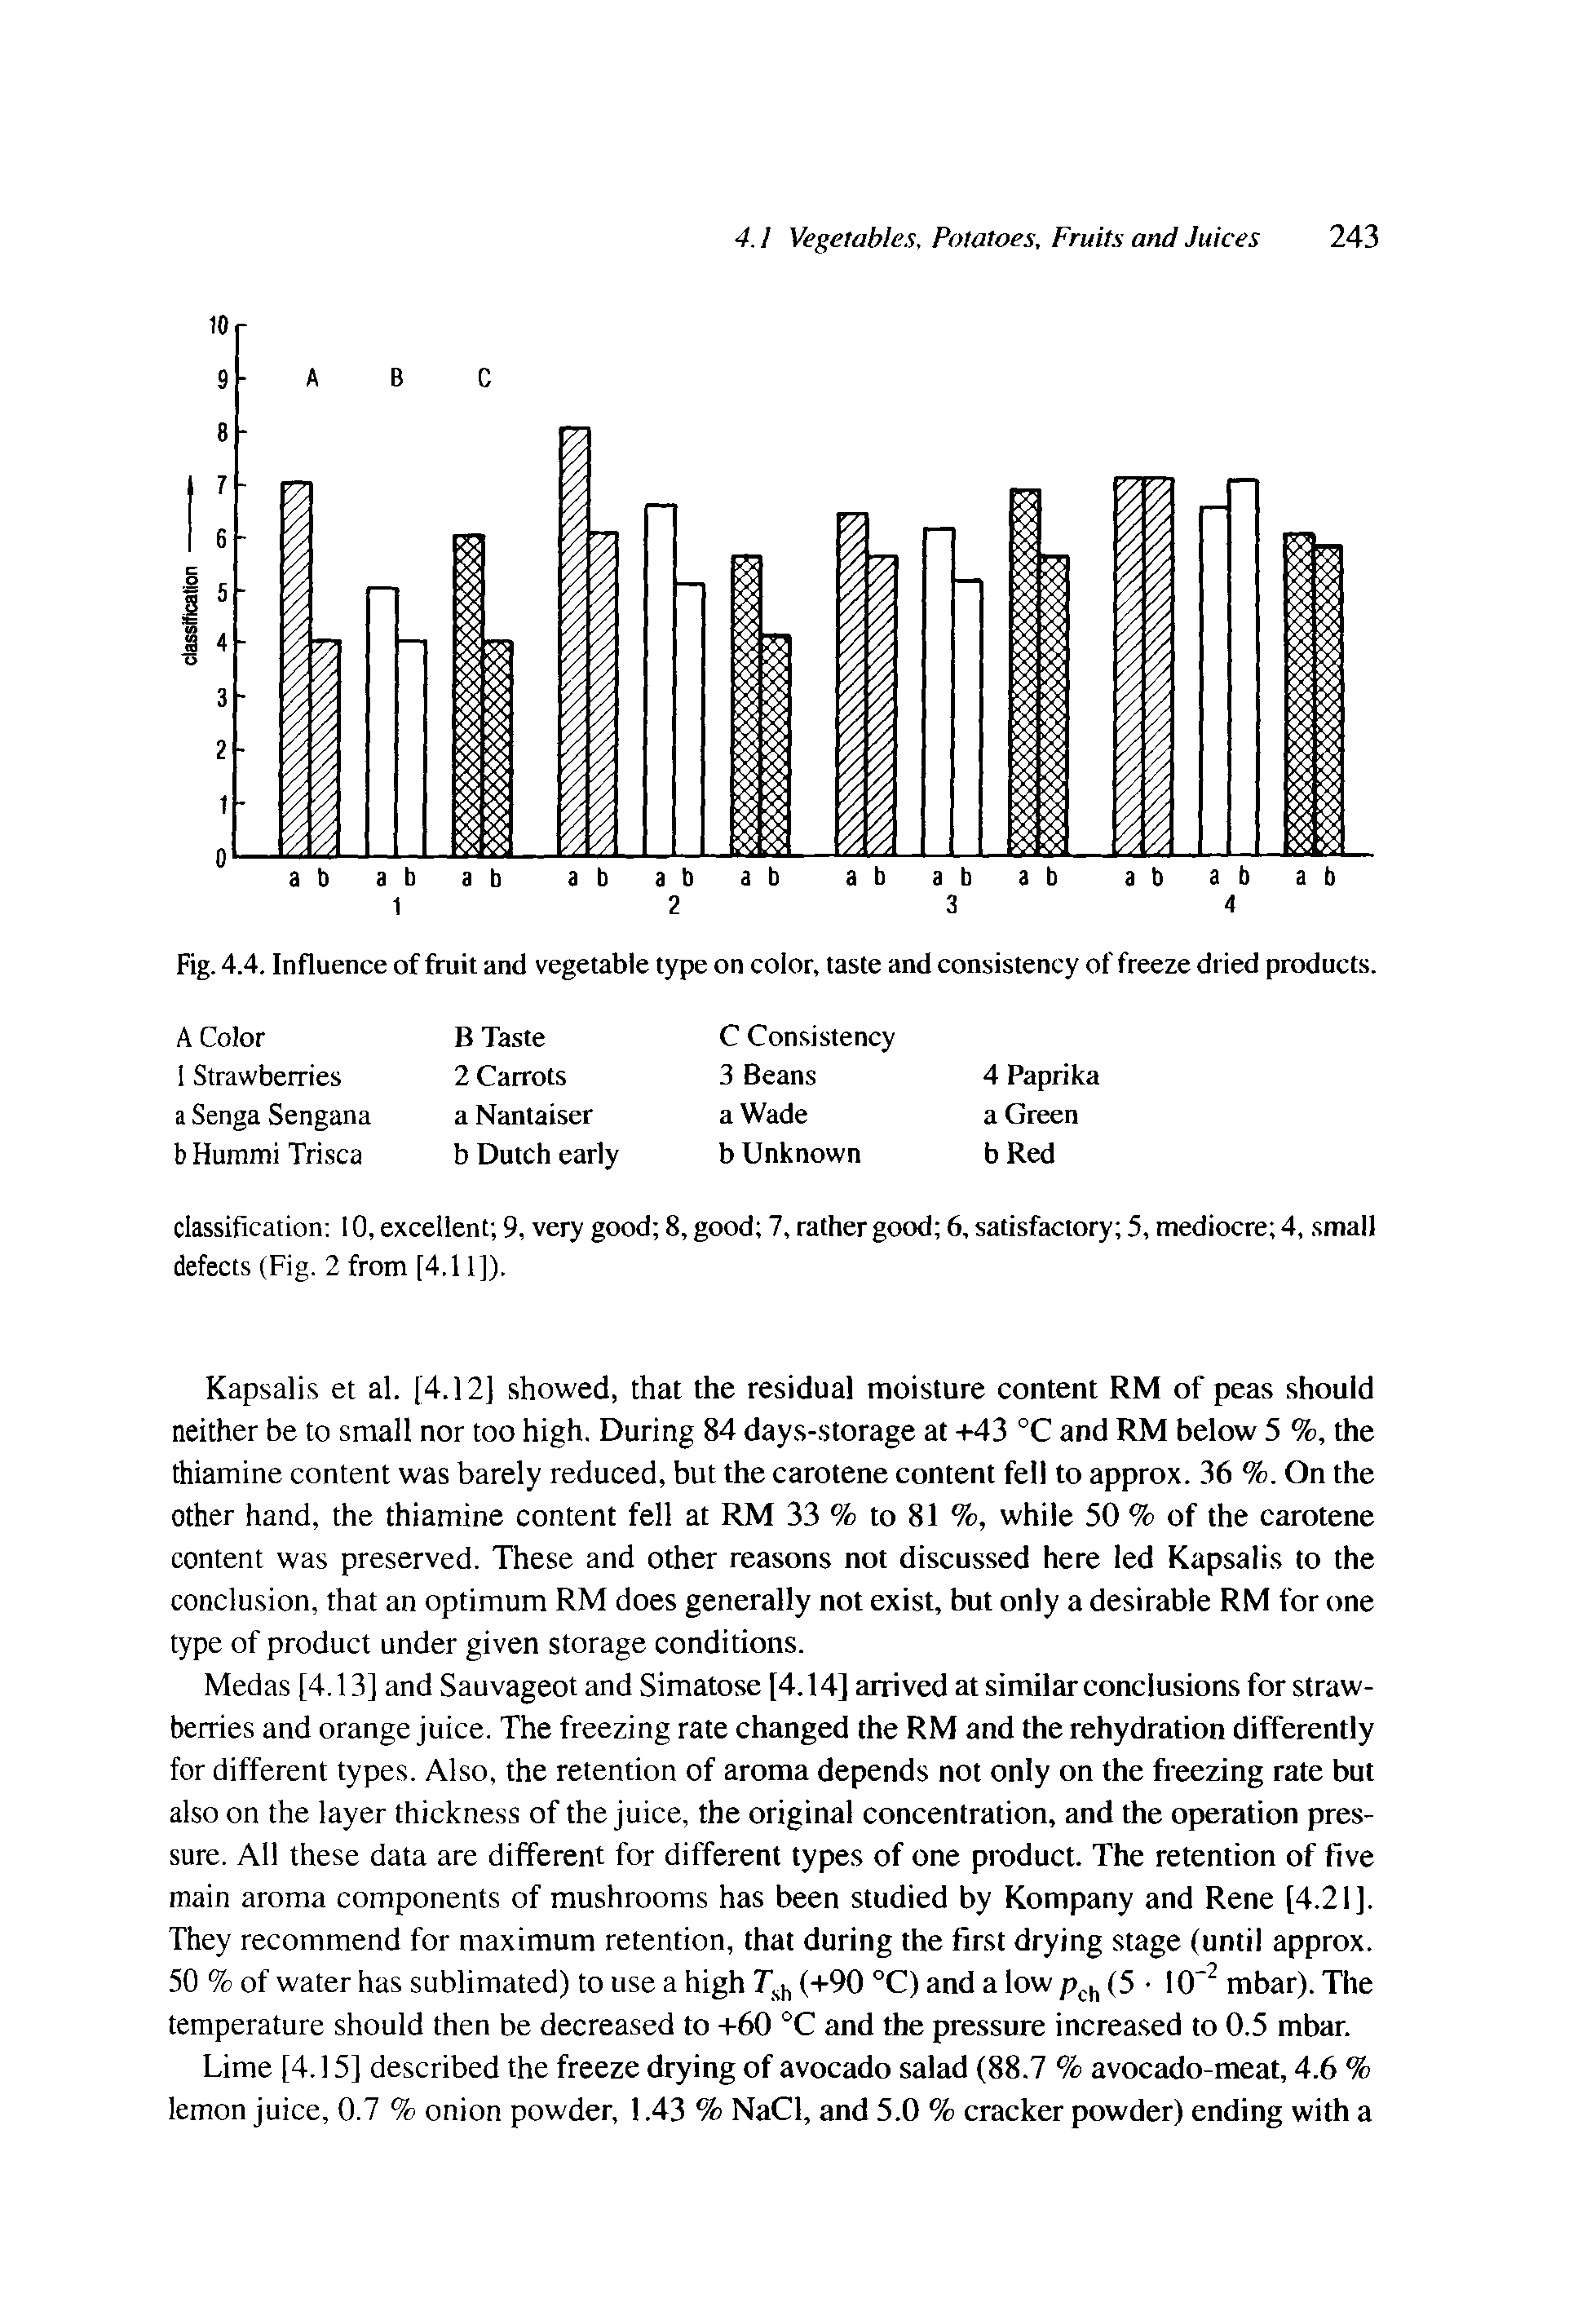 Fig. 4.4. Influence of fruit and vegetable type on color, taste and consistency of freeze dried products.